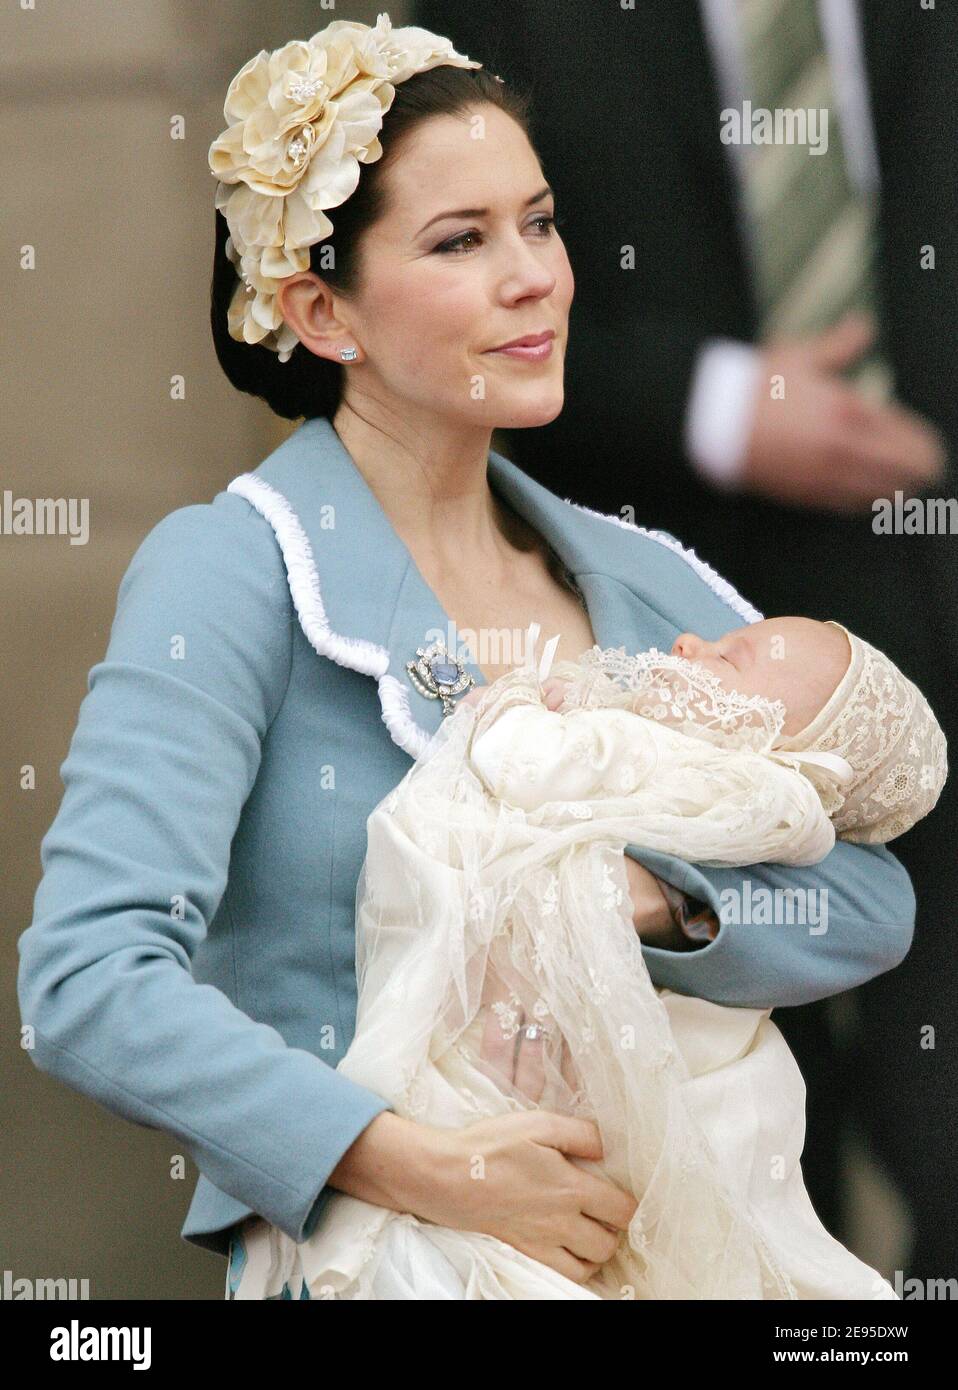 Denmark's Crown Princess Mary arrives for the christening of her first child who will be named Christian Valdemar Henri John by Bishop Erik Norman Svendsen during a ceremony held at Copenhagen' Christianborg Palace chapel, Denmark on January 21, 2006. Photo by Thierry Orban/ABACAPRESS.COM Stock Photo